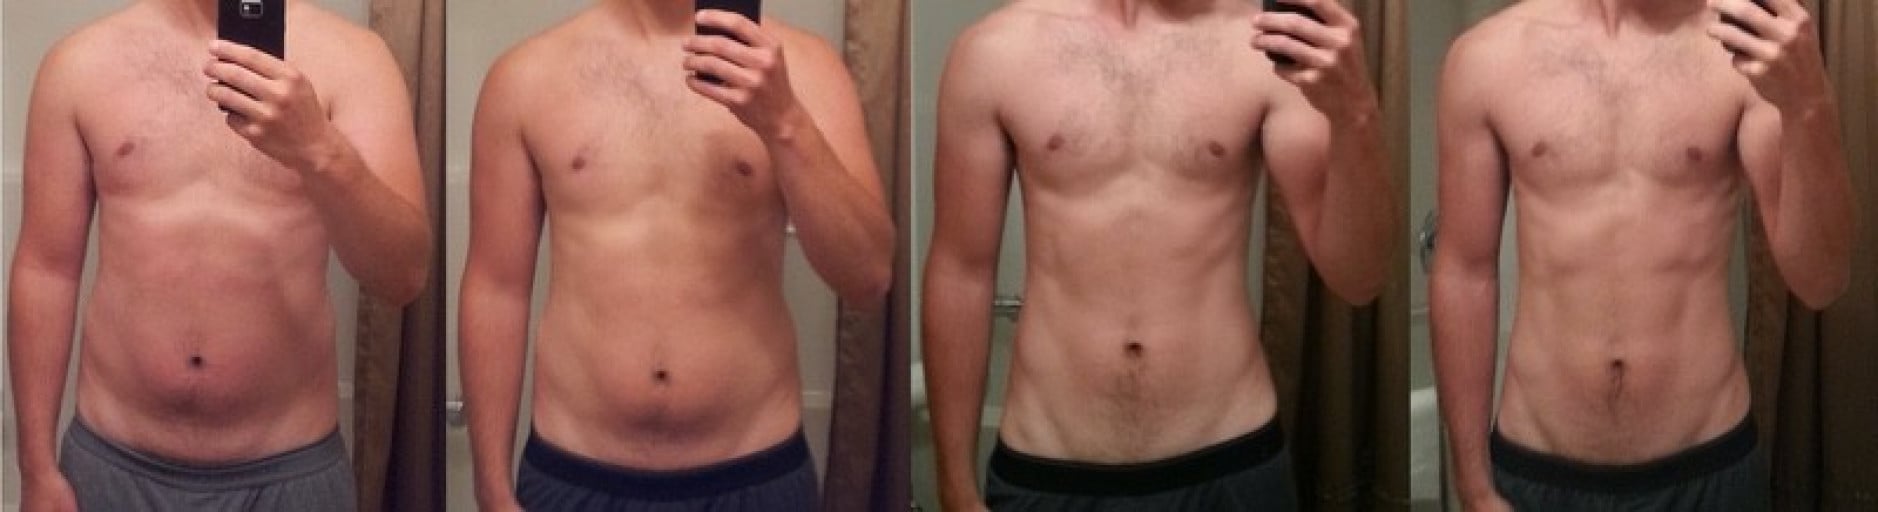 A progress pic of a 5'9" man showing a fat loss from 171 pounds to 141 pounds. A net loss of 30 pounds.